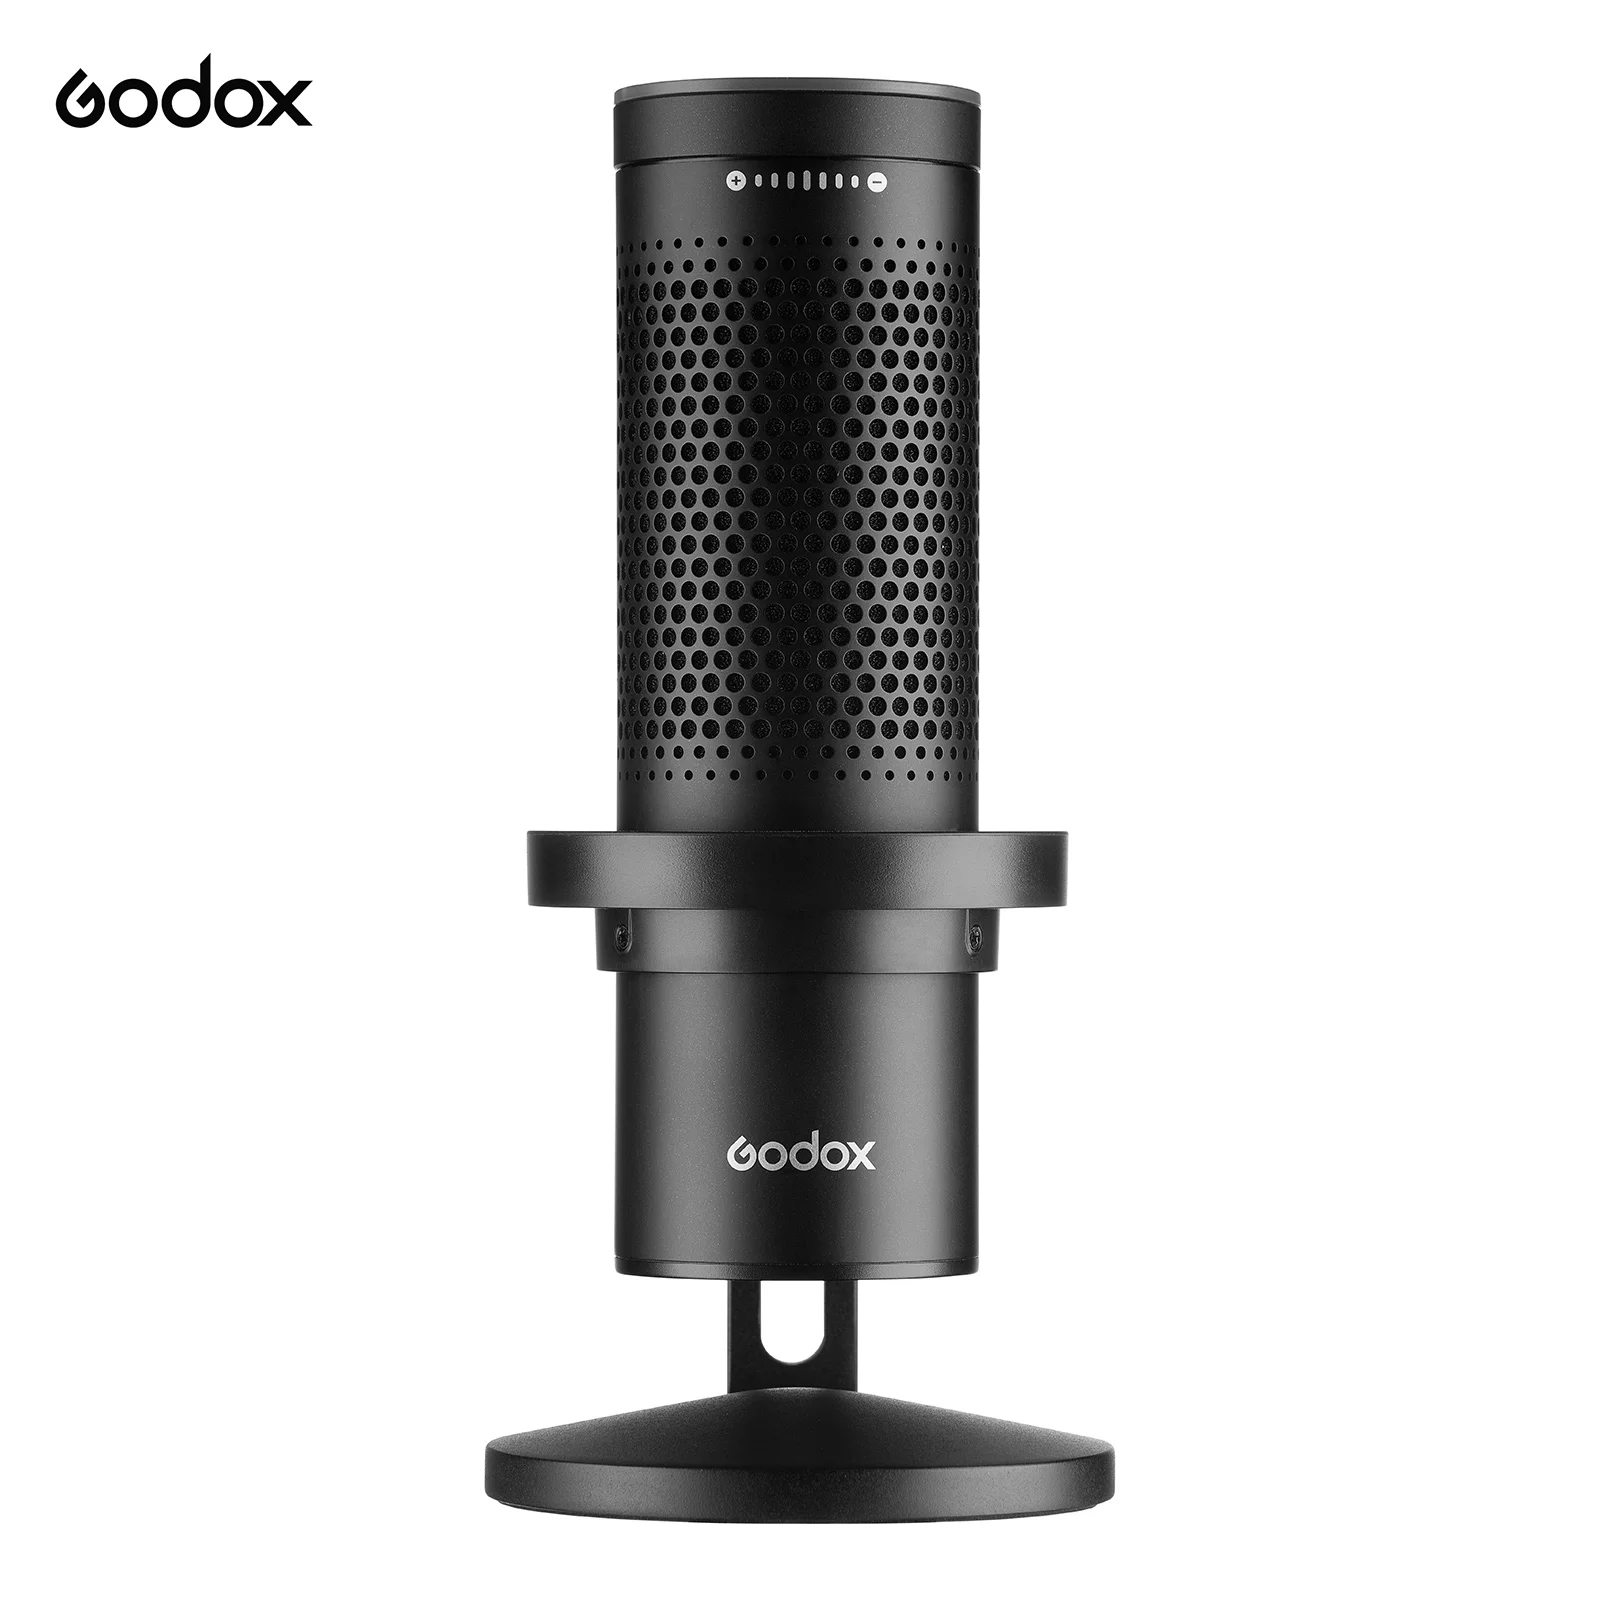 

Godox EM68G/EM68 Microphone Professional USB Cardioid Microphone Mini Desktop Recording Mic for Game Video Conference Recording